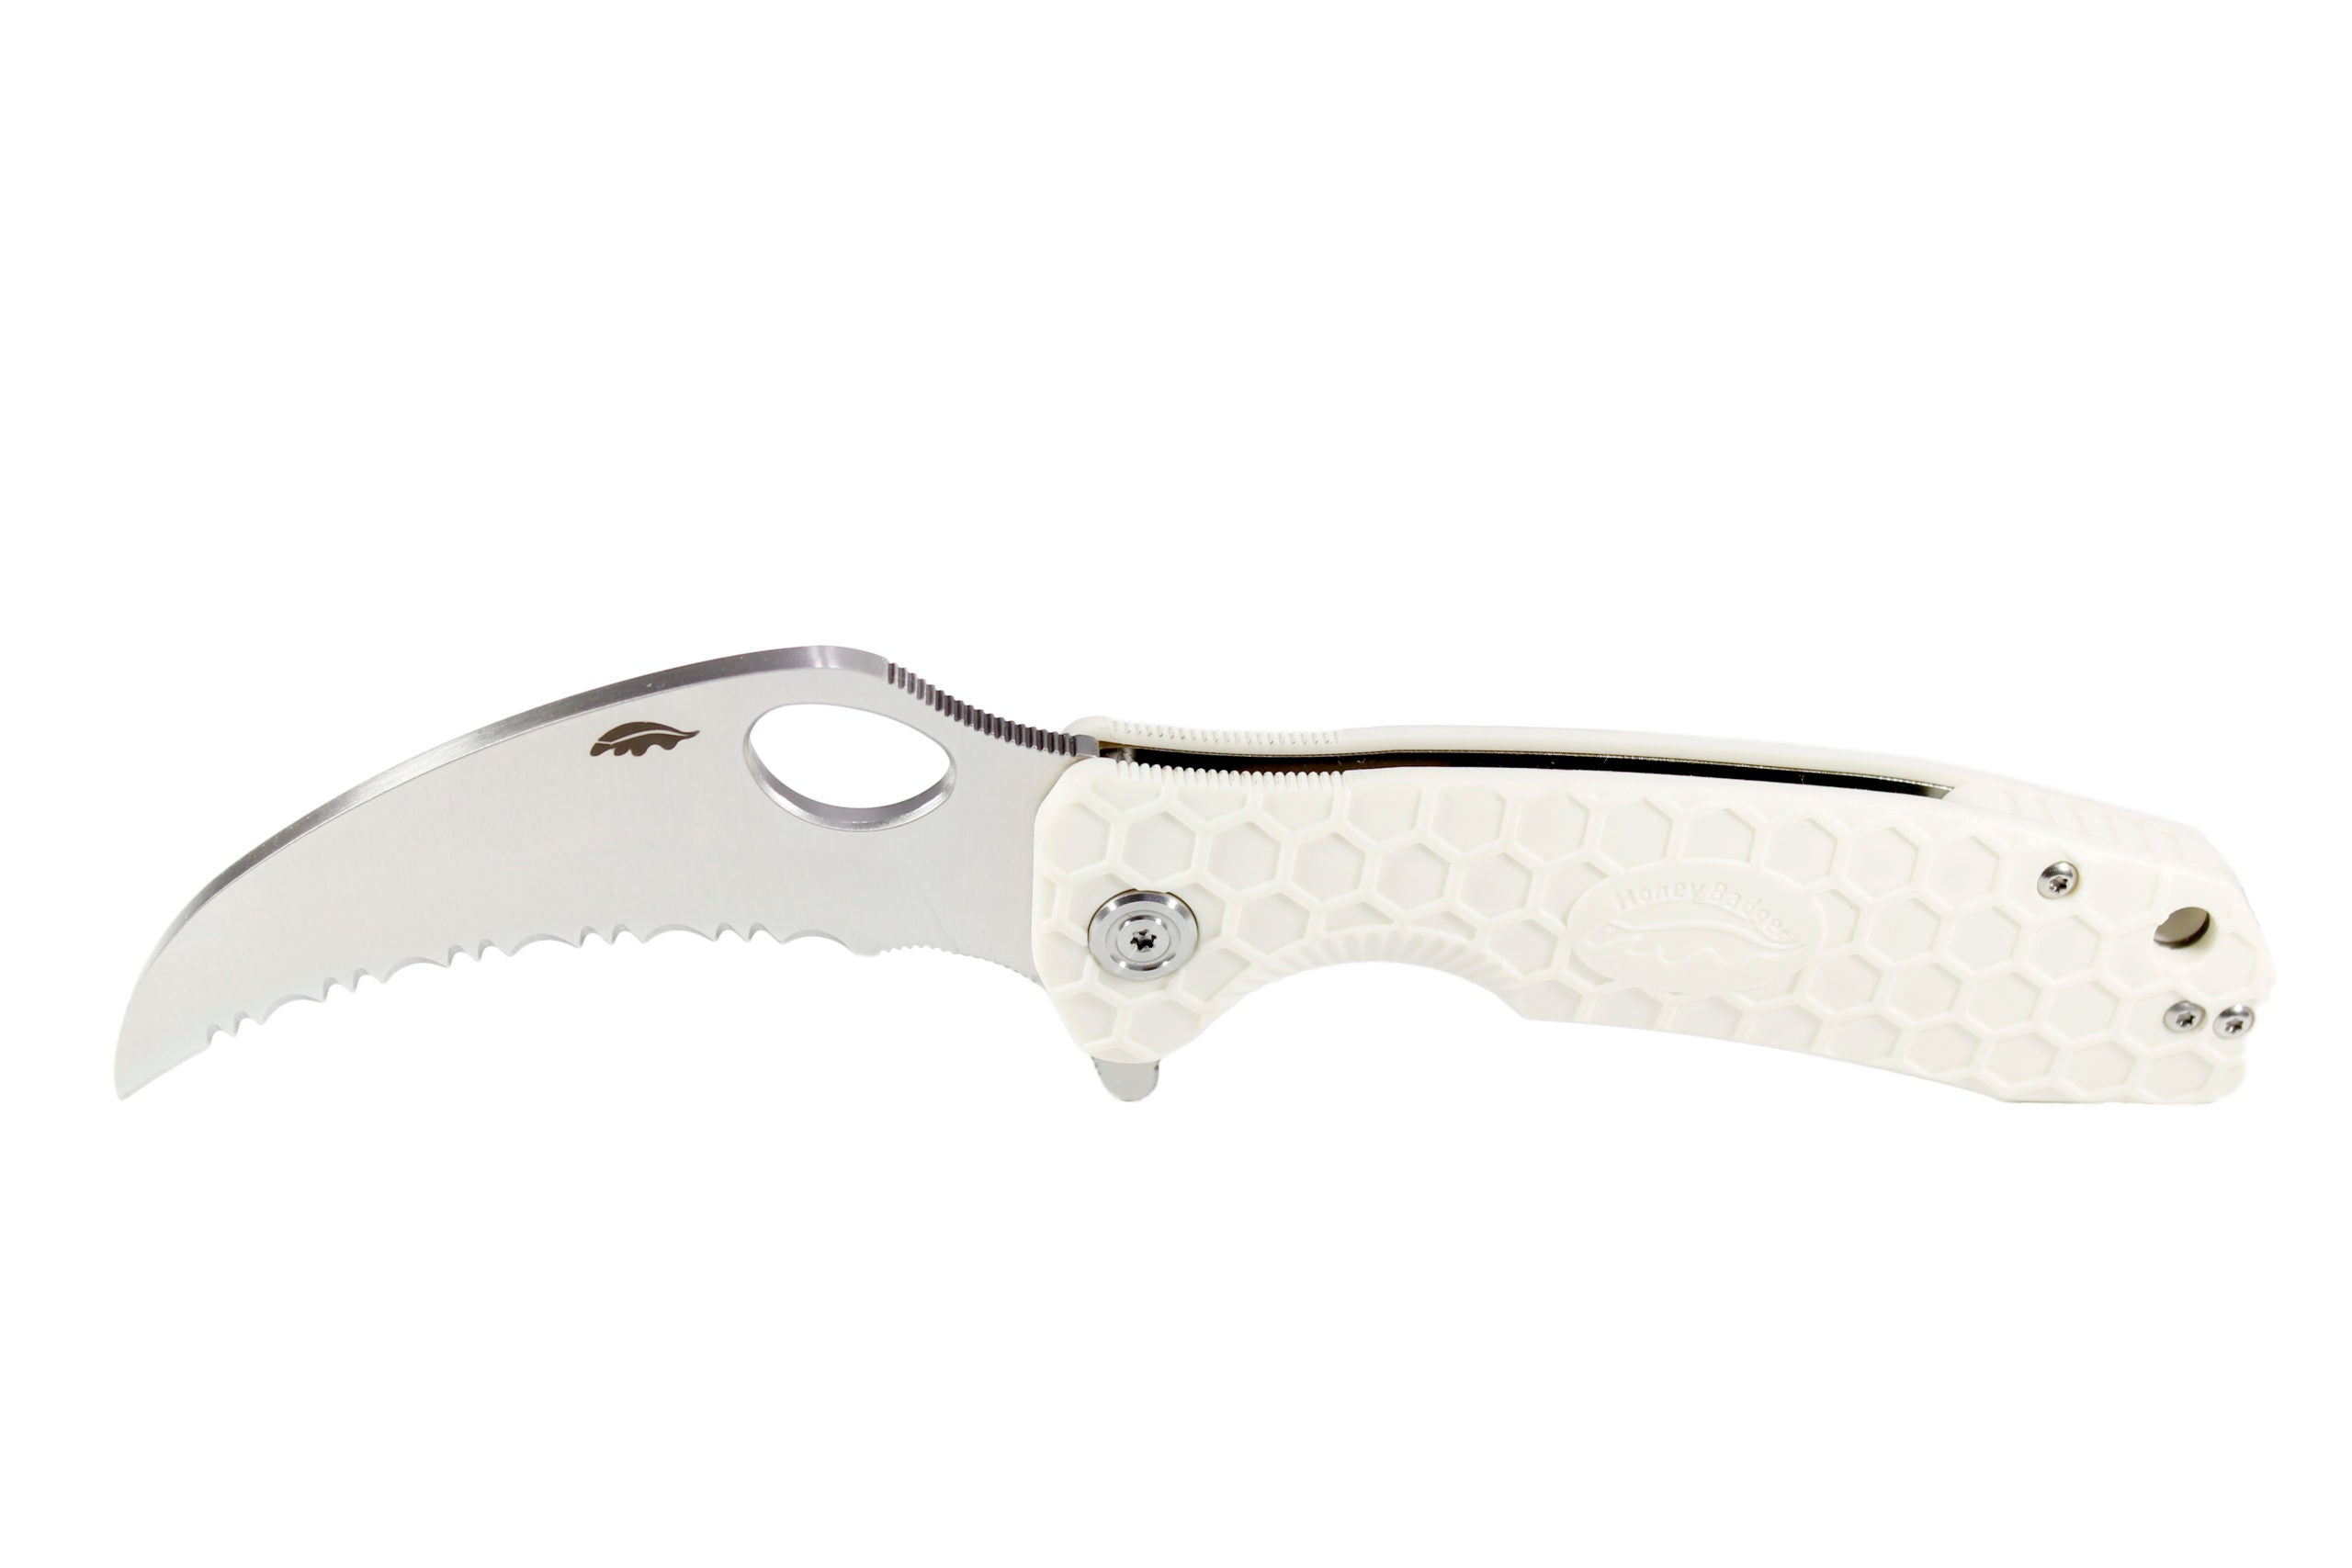 Honey Badger Claw L/R Large - White Serrated